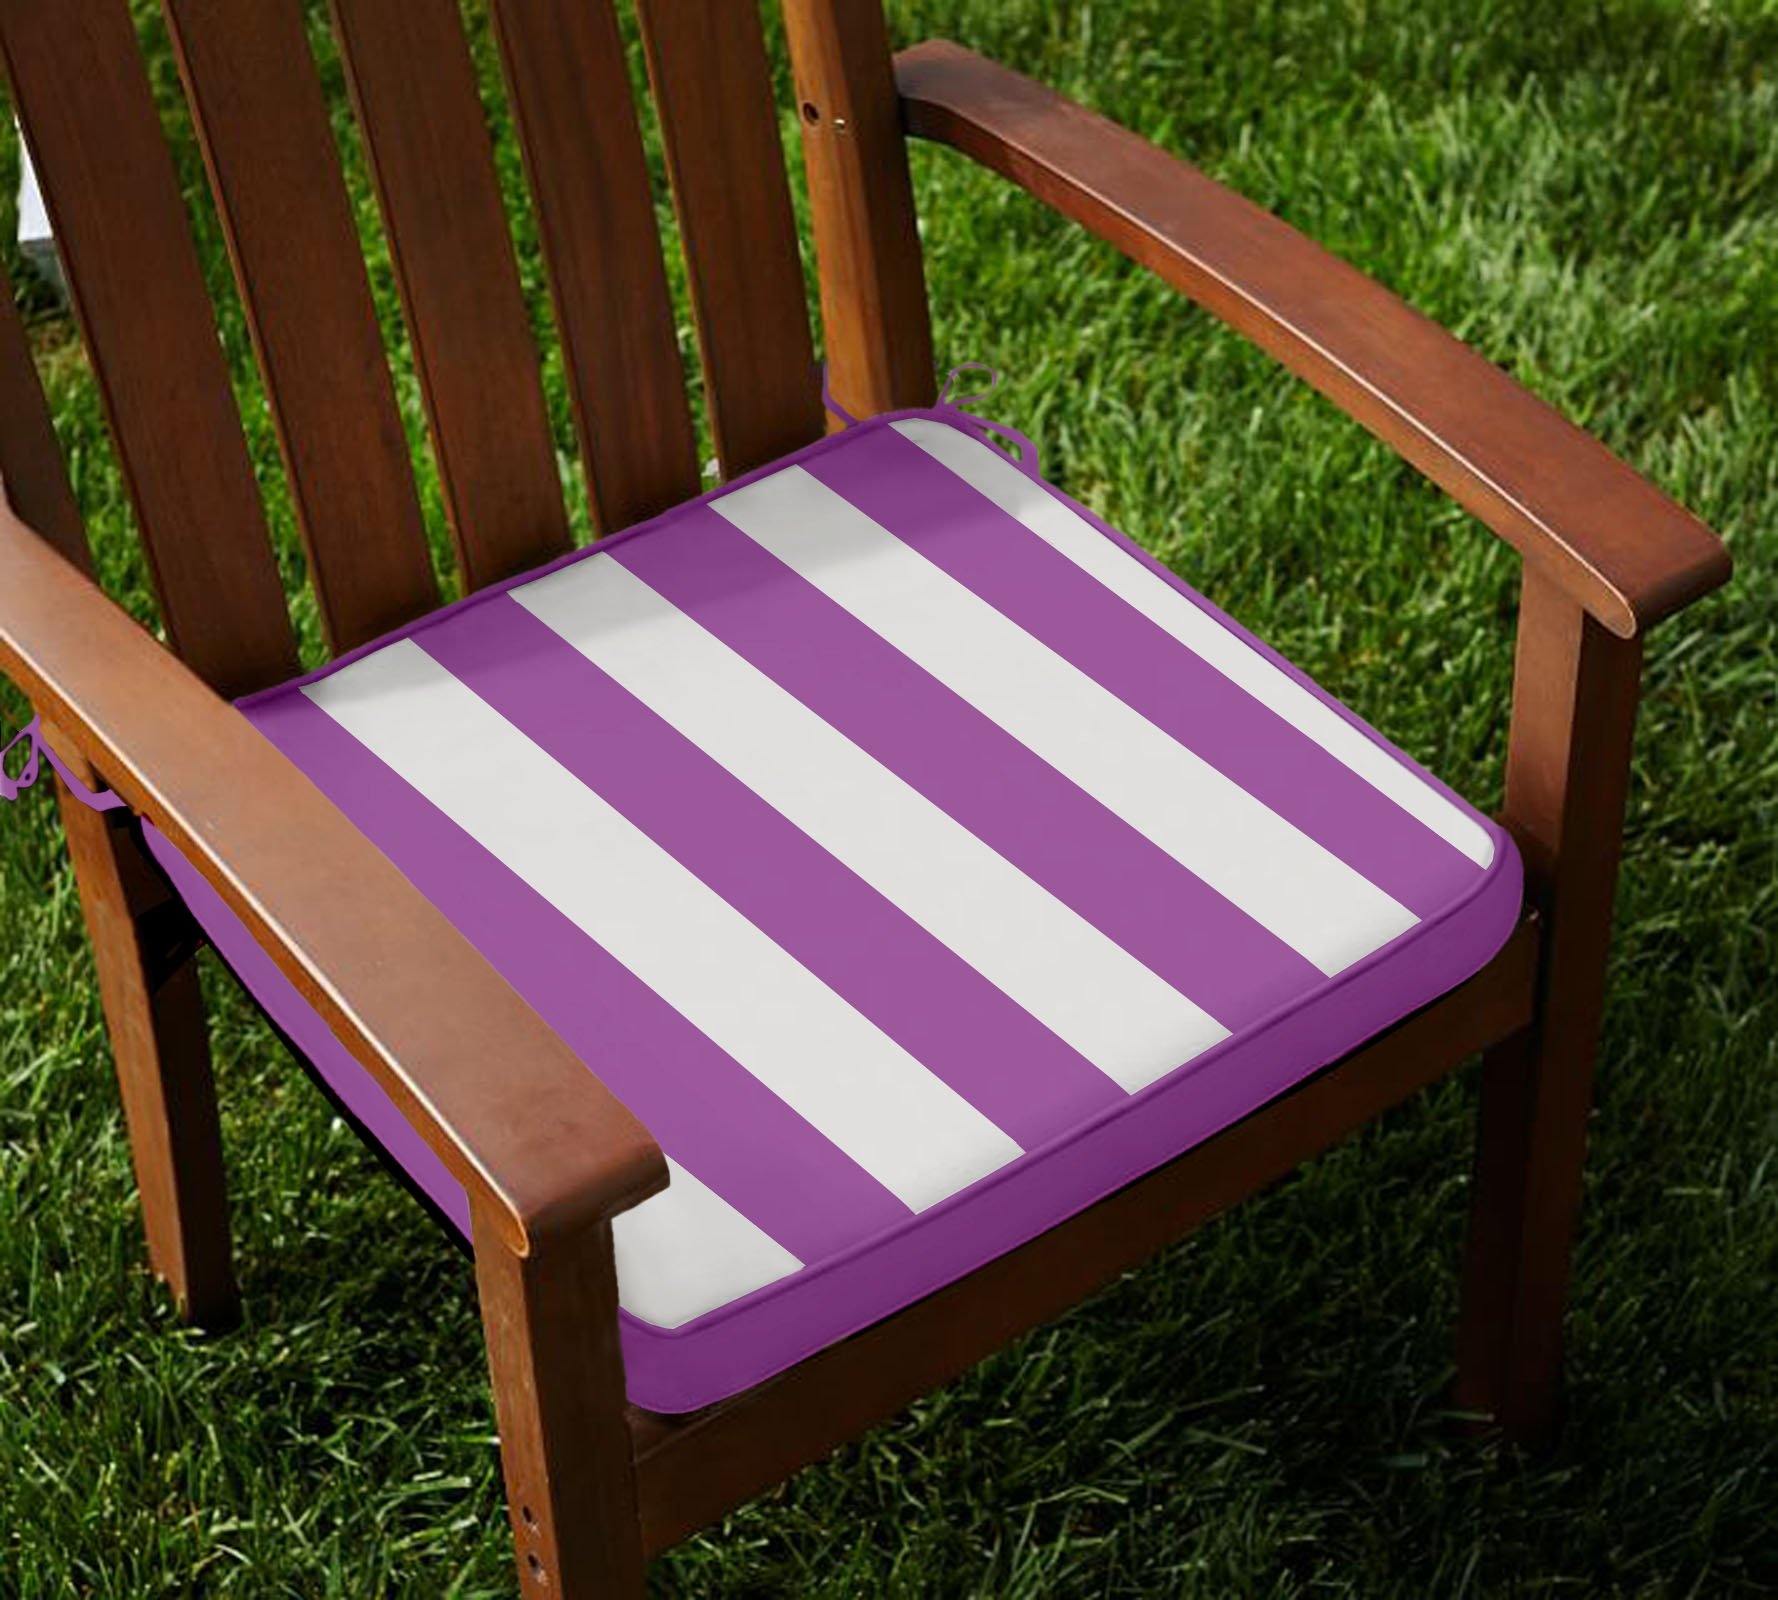 Lushomes Purple Square Striped Chairpad with Top Zipper and 4 Strings (2 pcs) - Lushomes